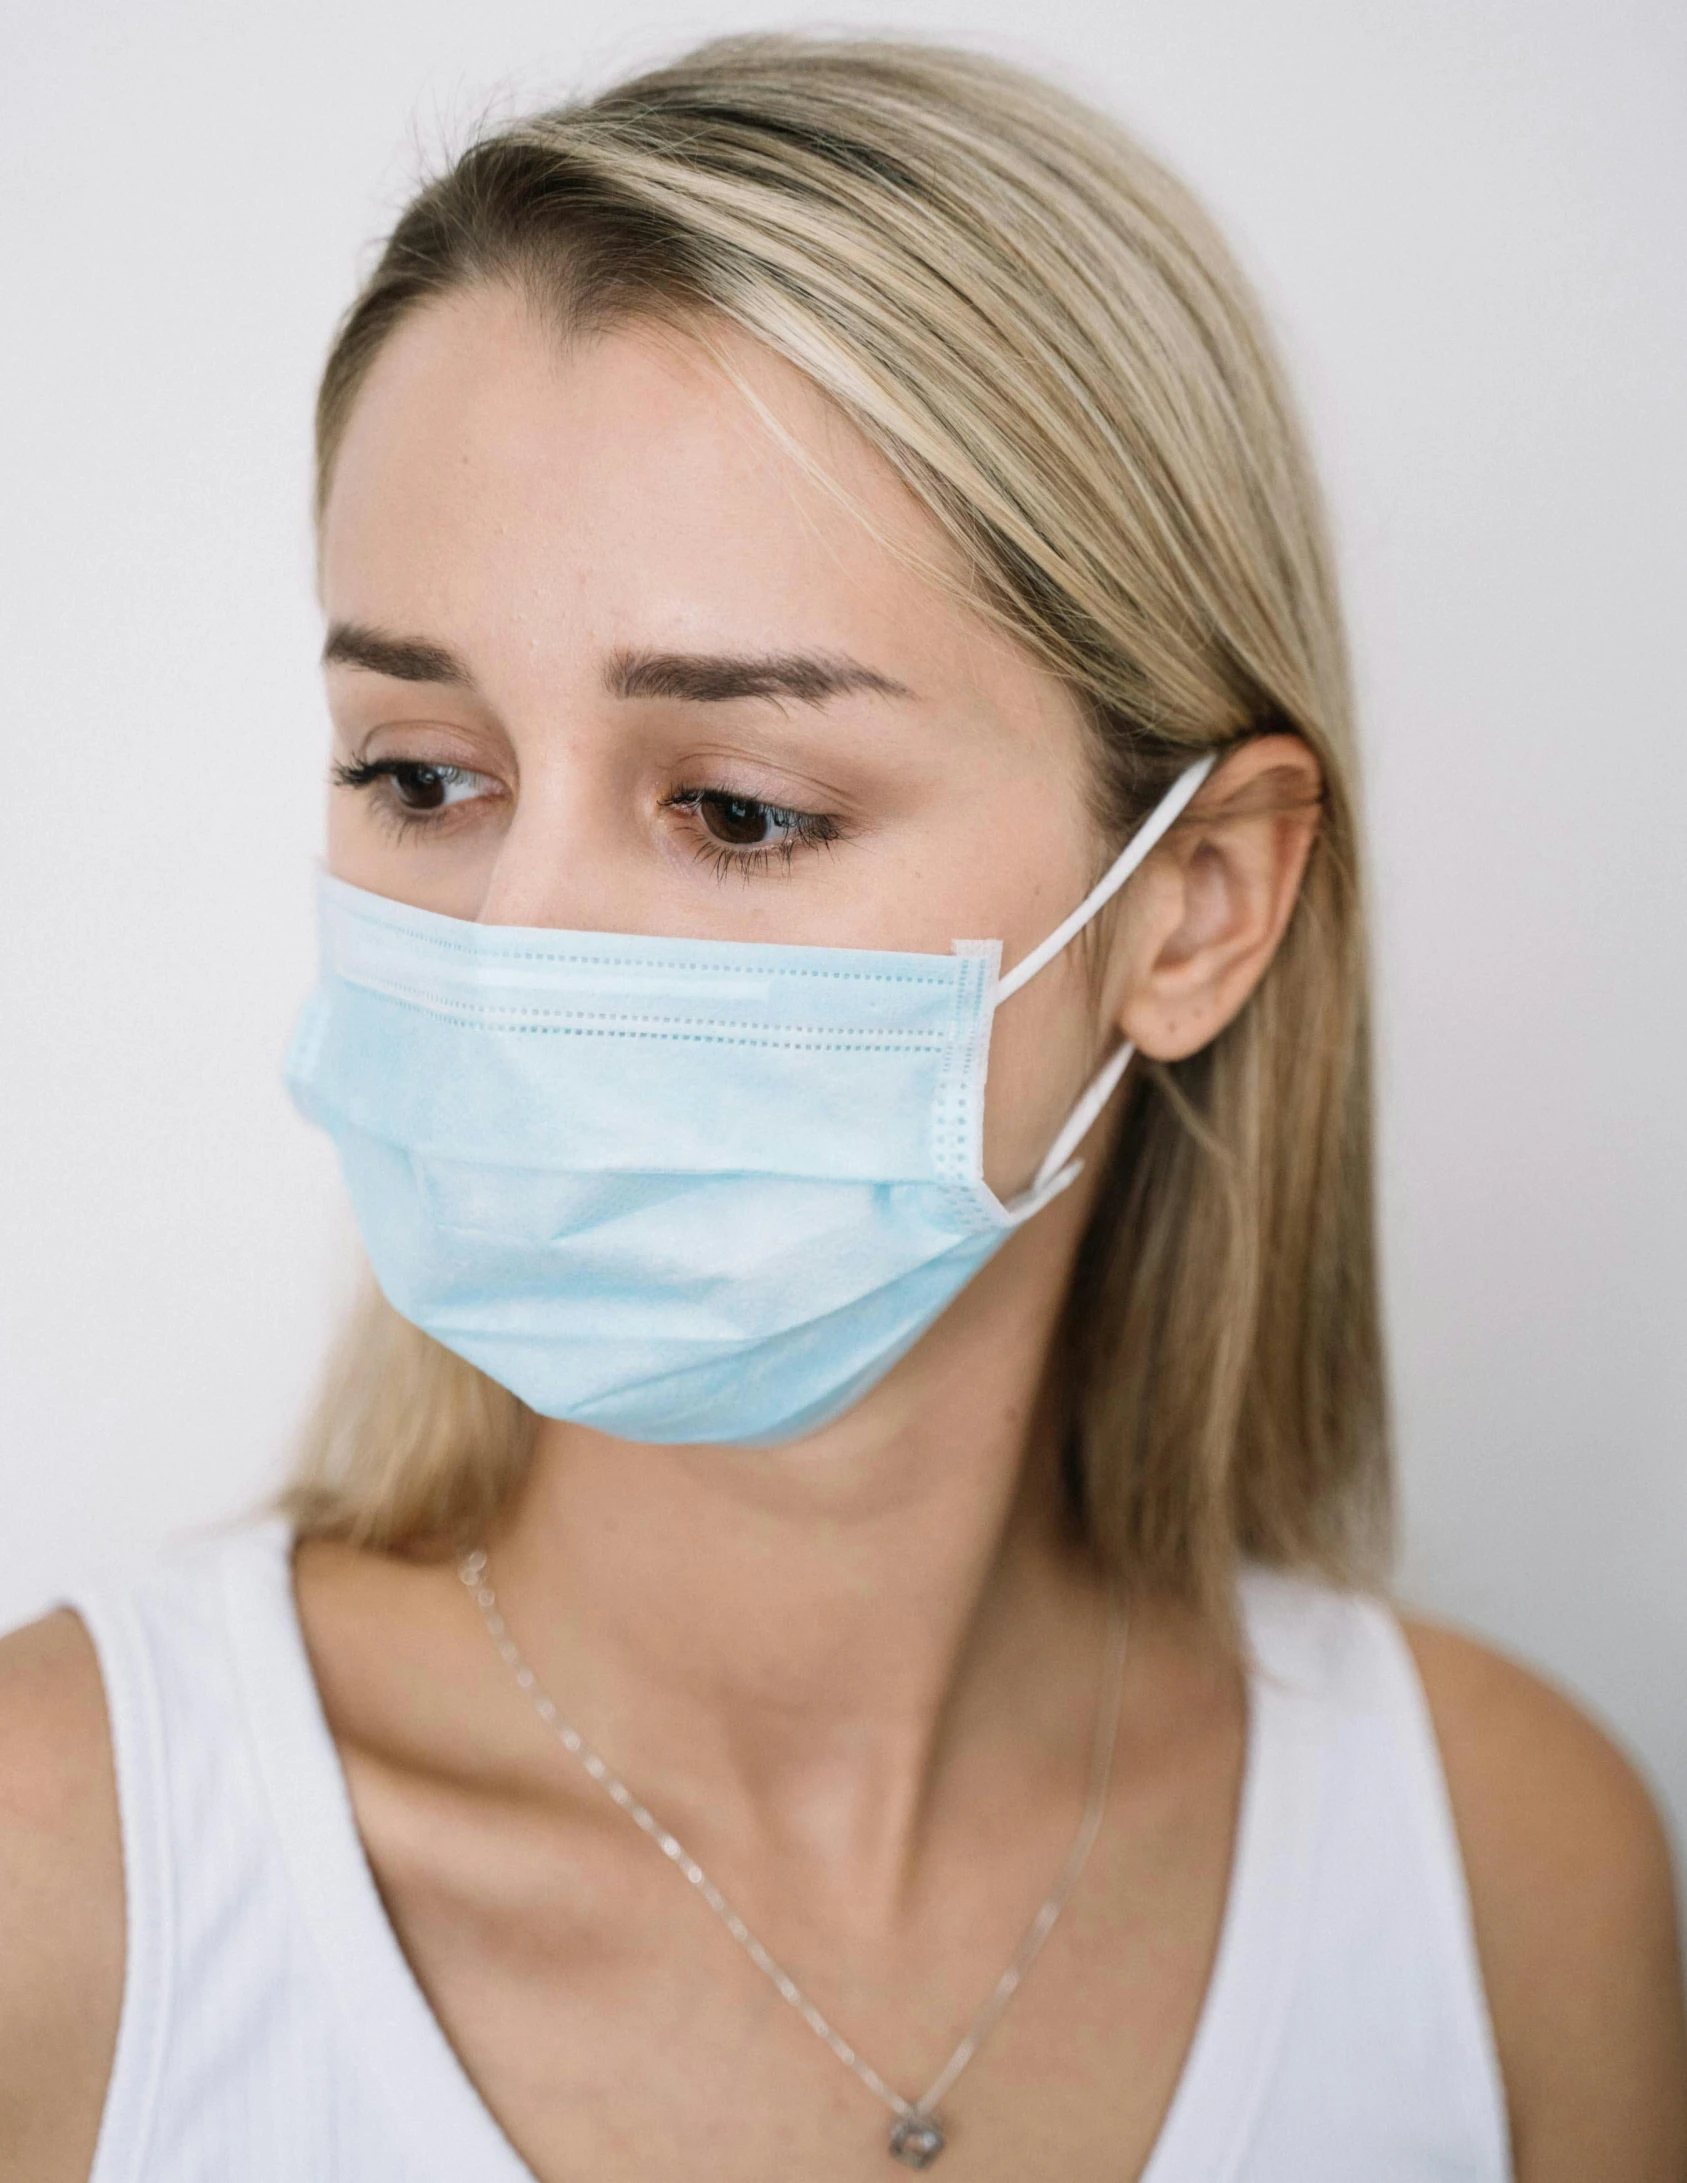 a woman wearing a surgical mask, by Adam Marczyński, trending on pexels, happening, wearing a light blue shirt, product introduction photo, erin moriarty, 😭🤮 💔